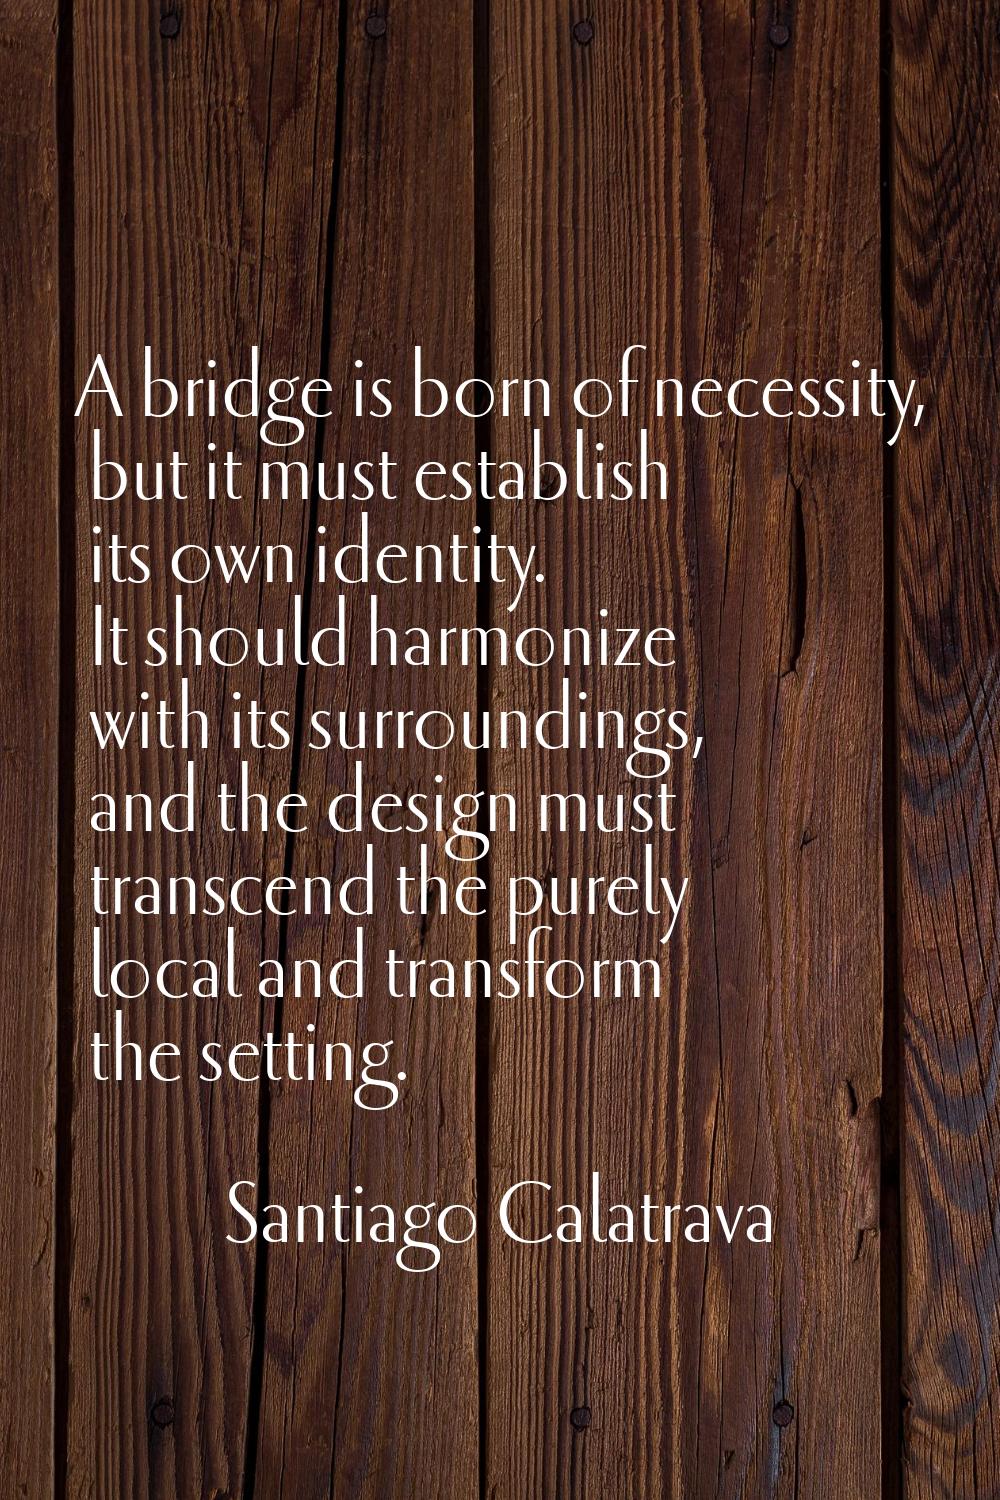 A bridge is born of necessity, but it must establish its own identity. It should harmonize with its